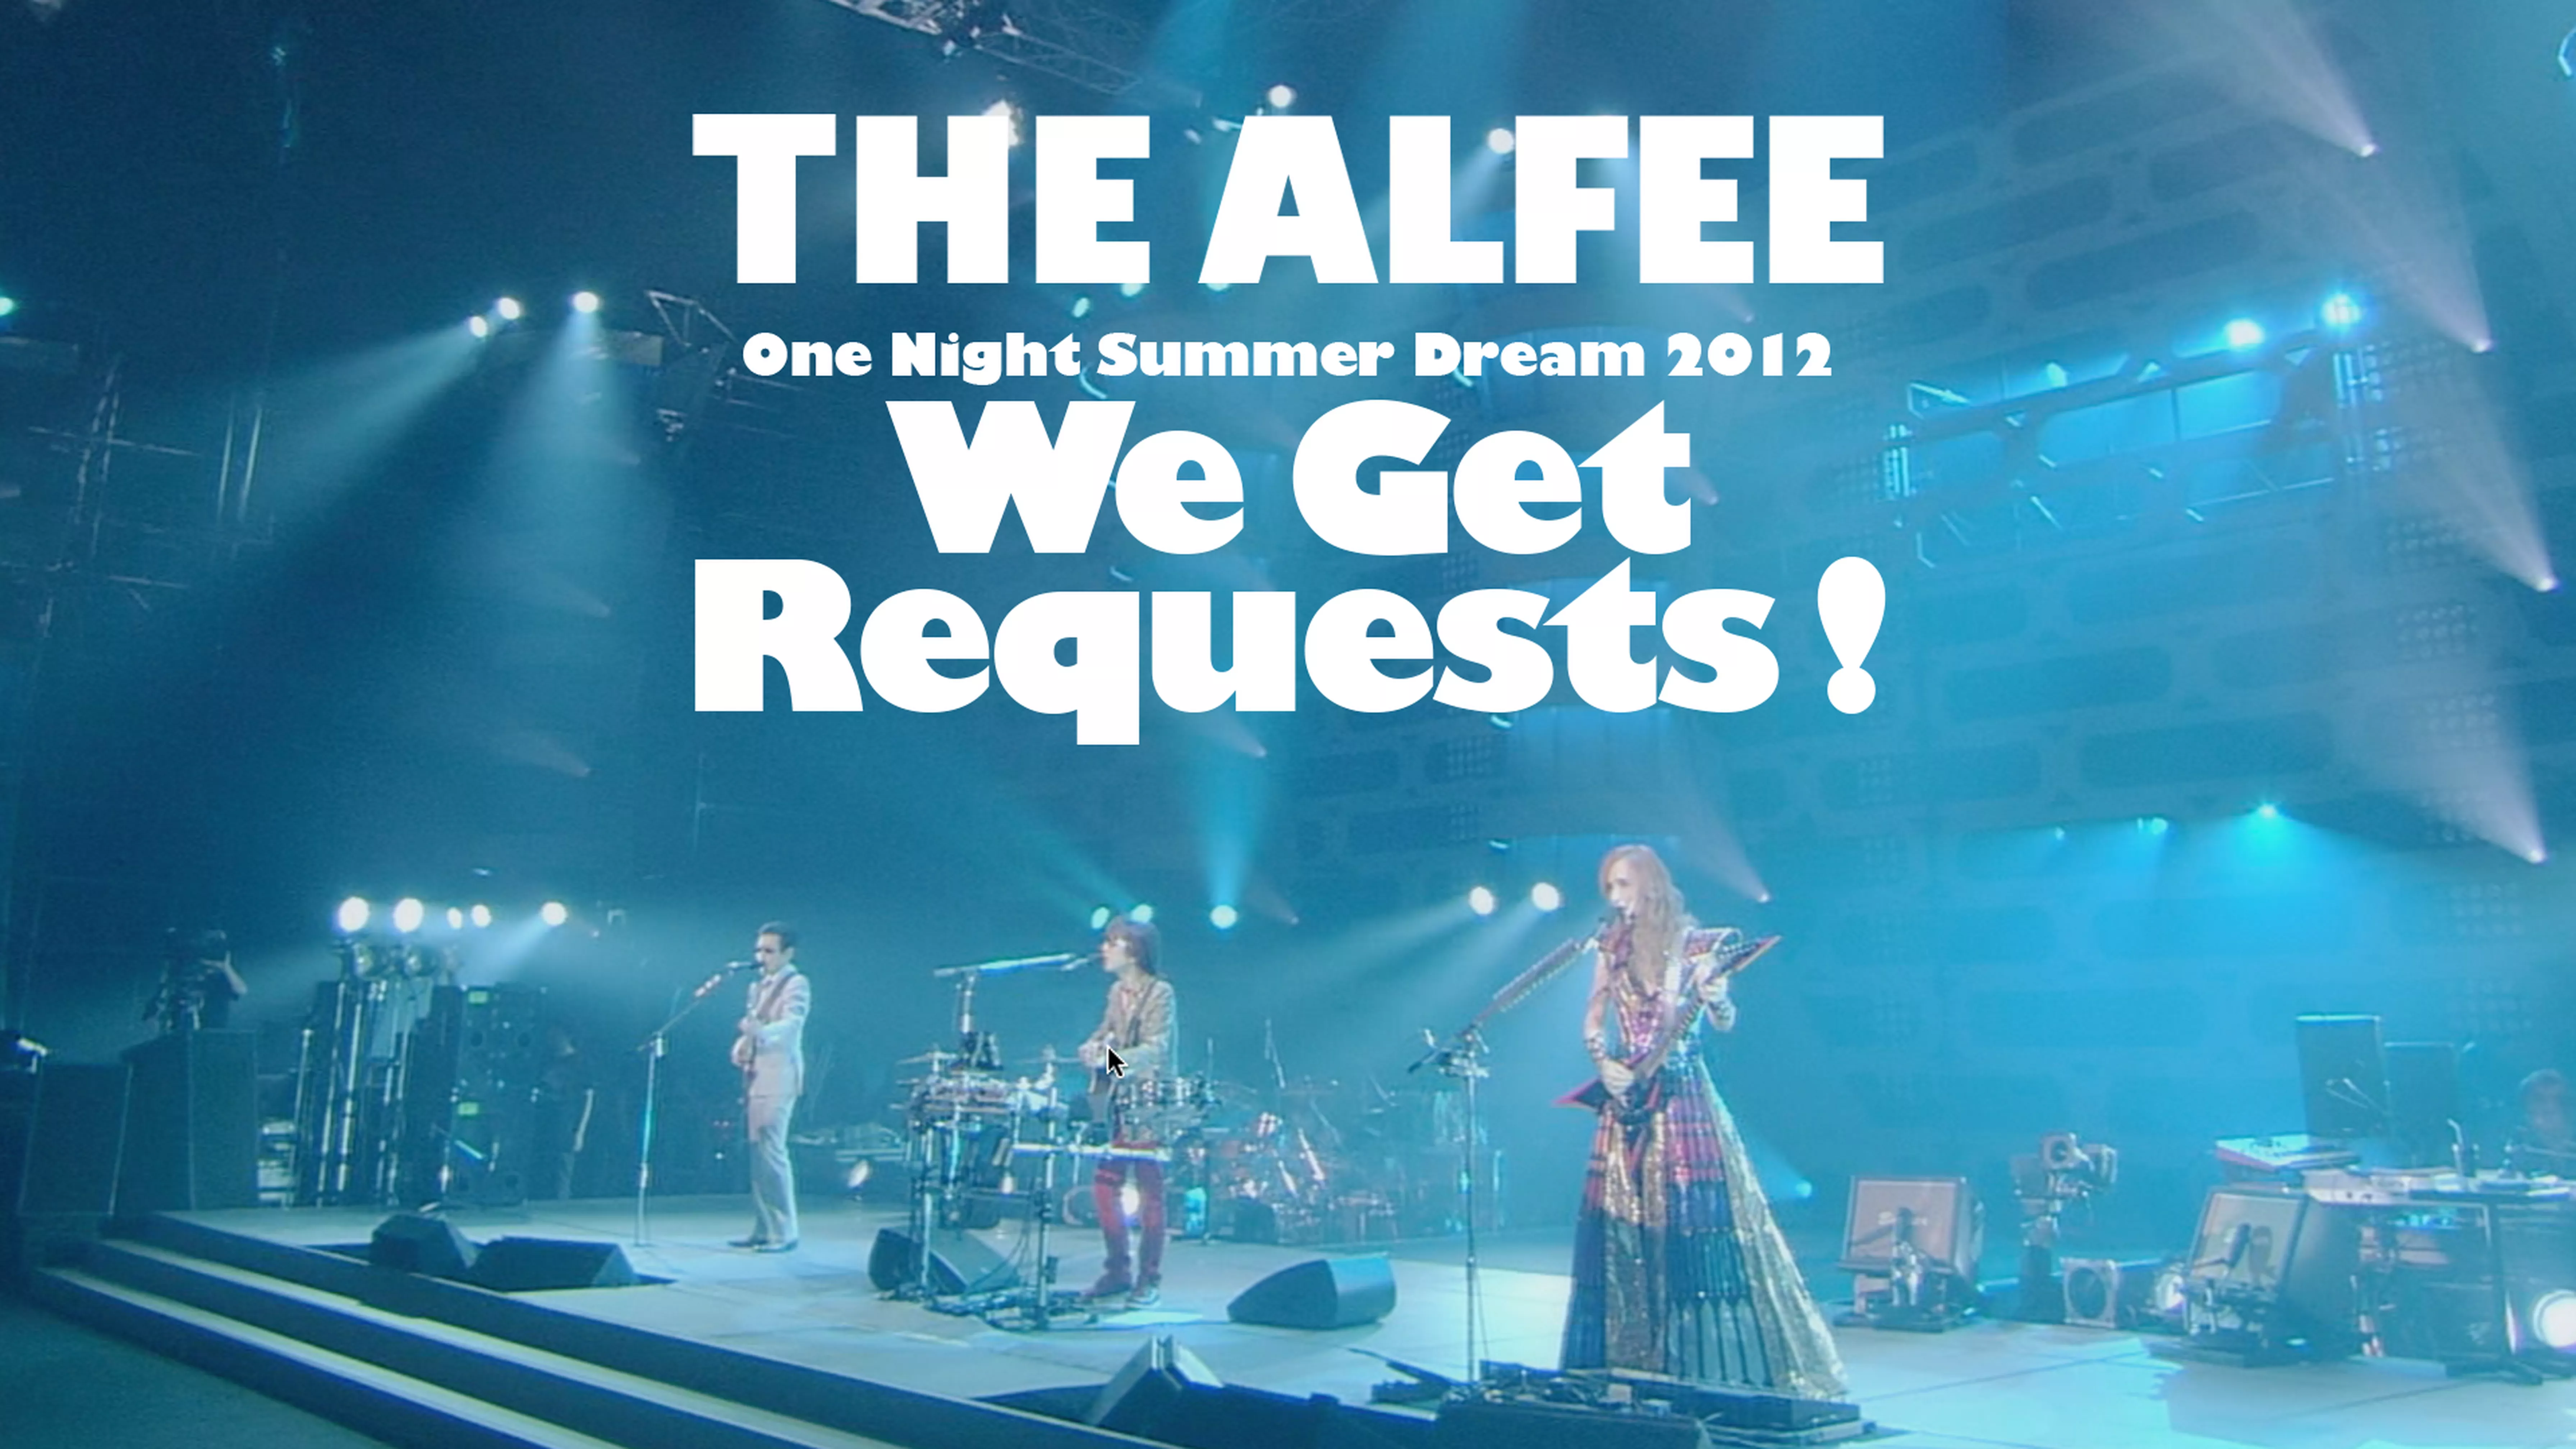 THE ALFEE One Night Summer Dream 2012 We Get Requests!